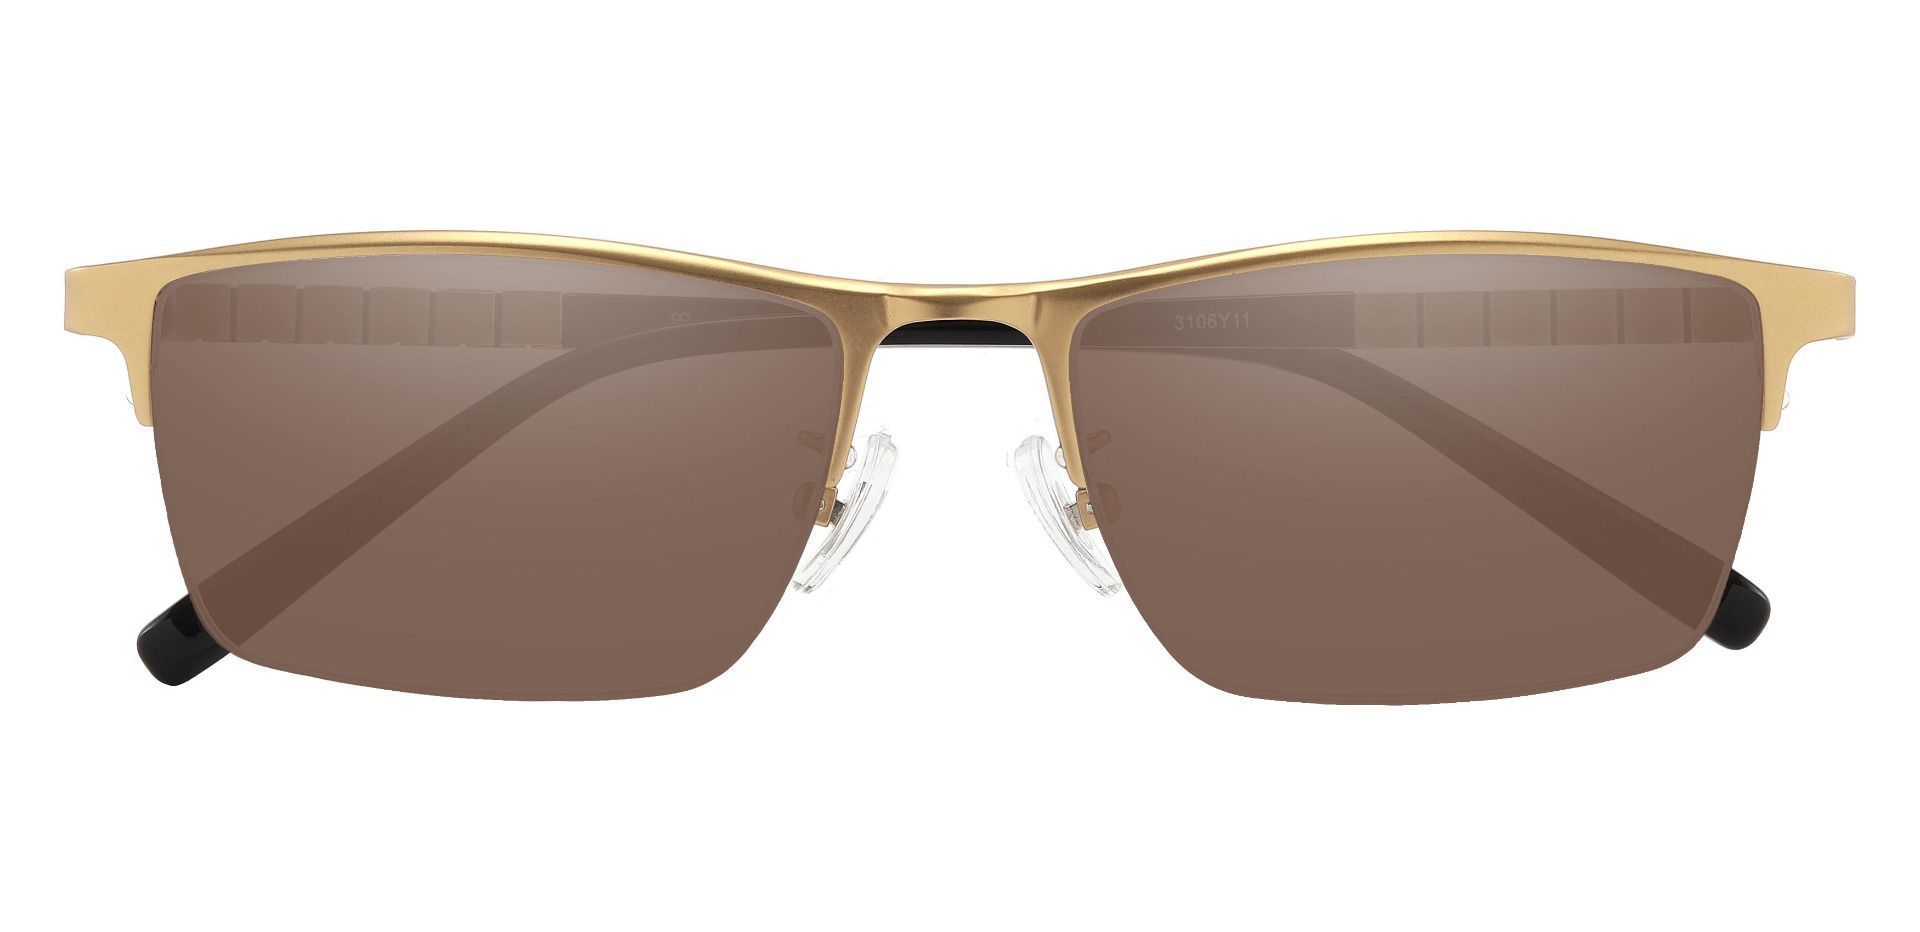 Maine Rectangle Non-Rx Sunglasses - Gold Frame With Brown Lenses